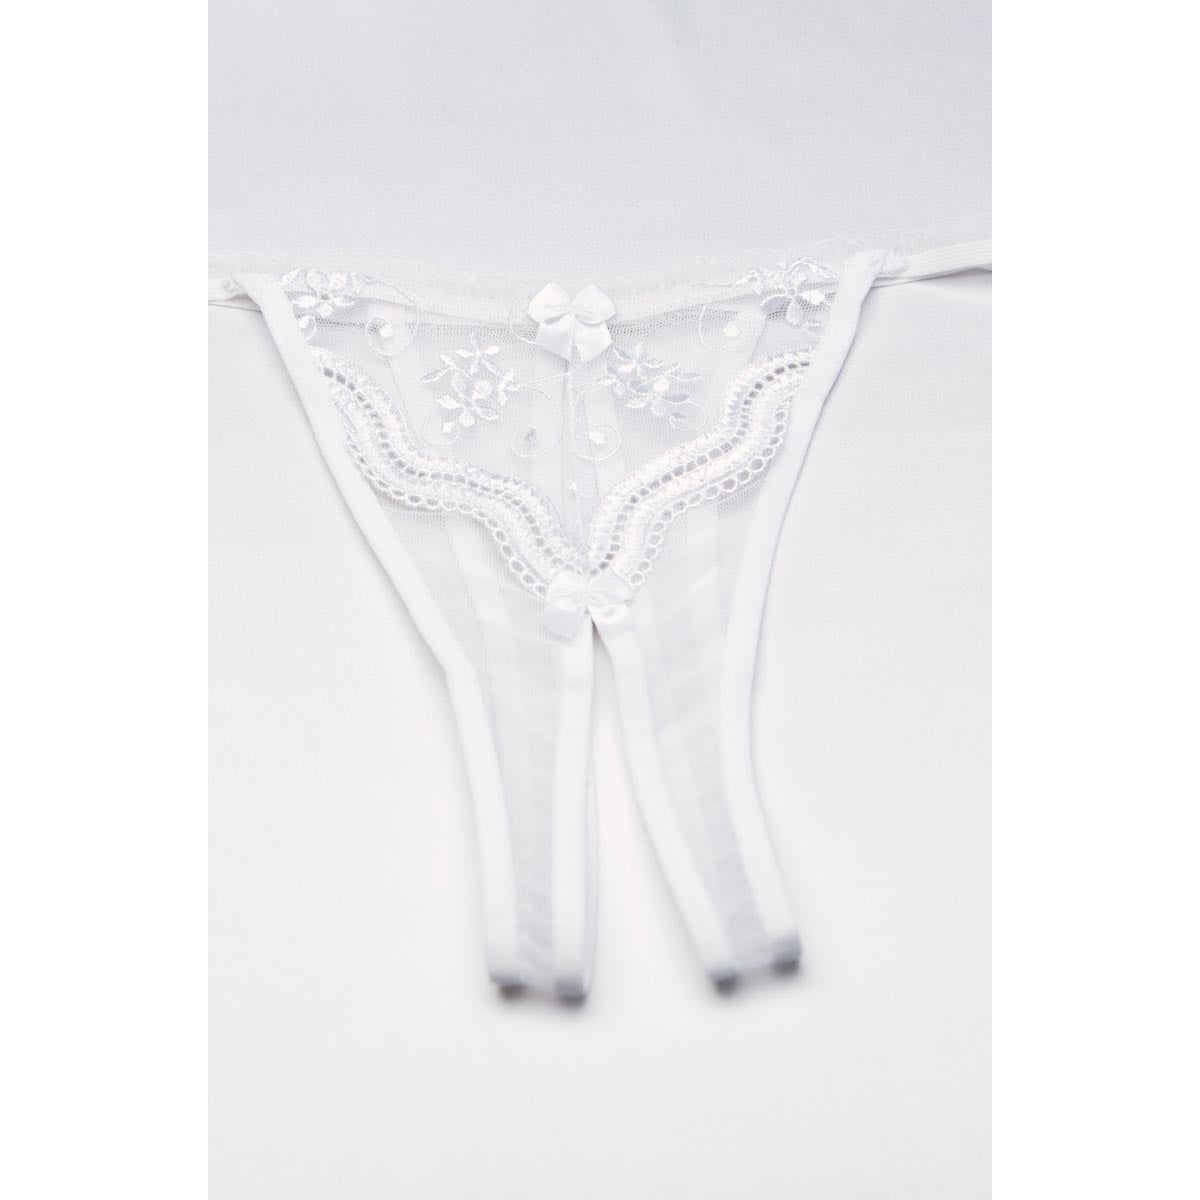 Shirley of Hollywood 10 Thong White